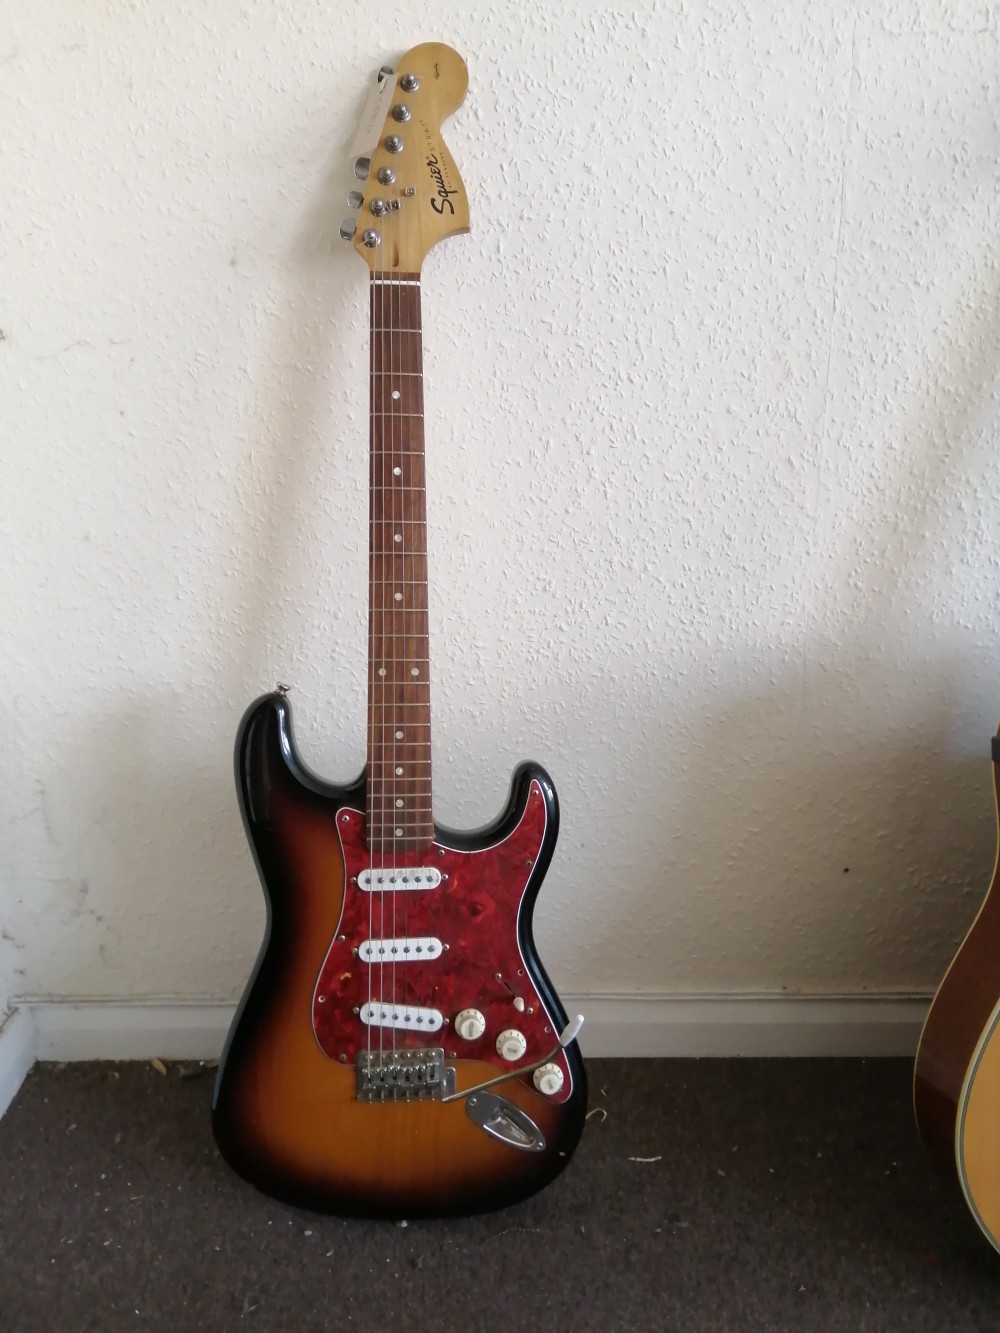 A Squier Affinity Series electric guitar